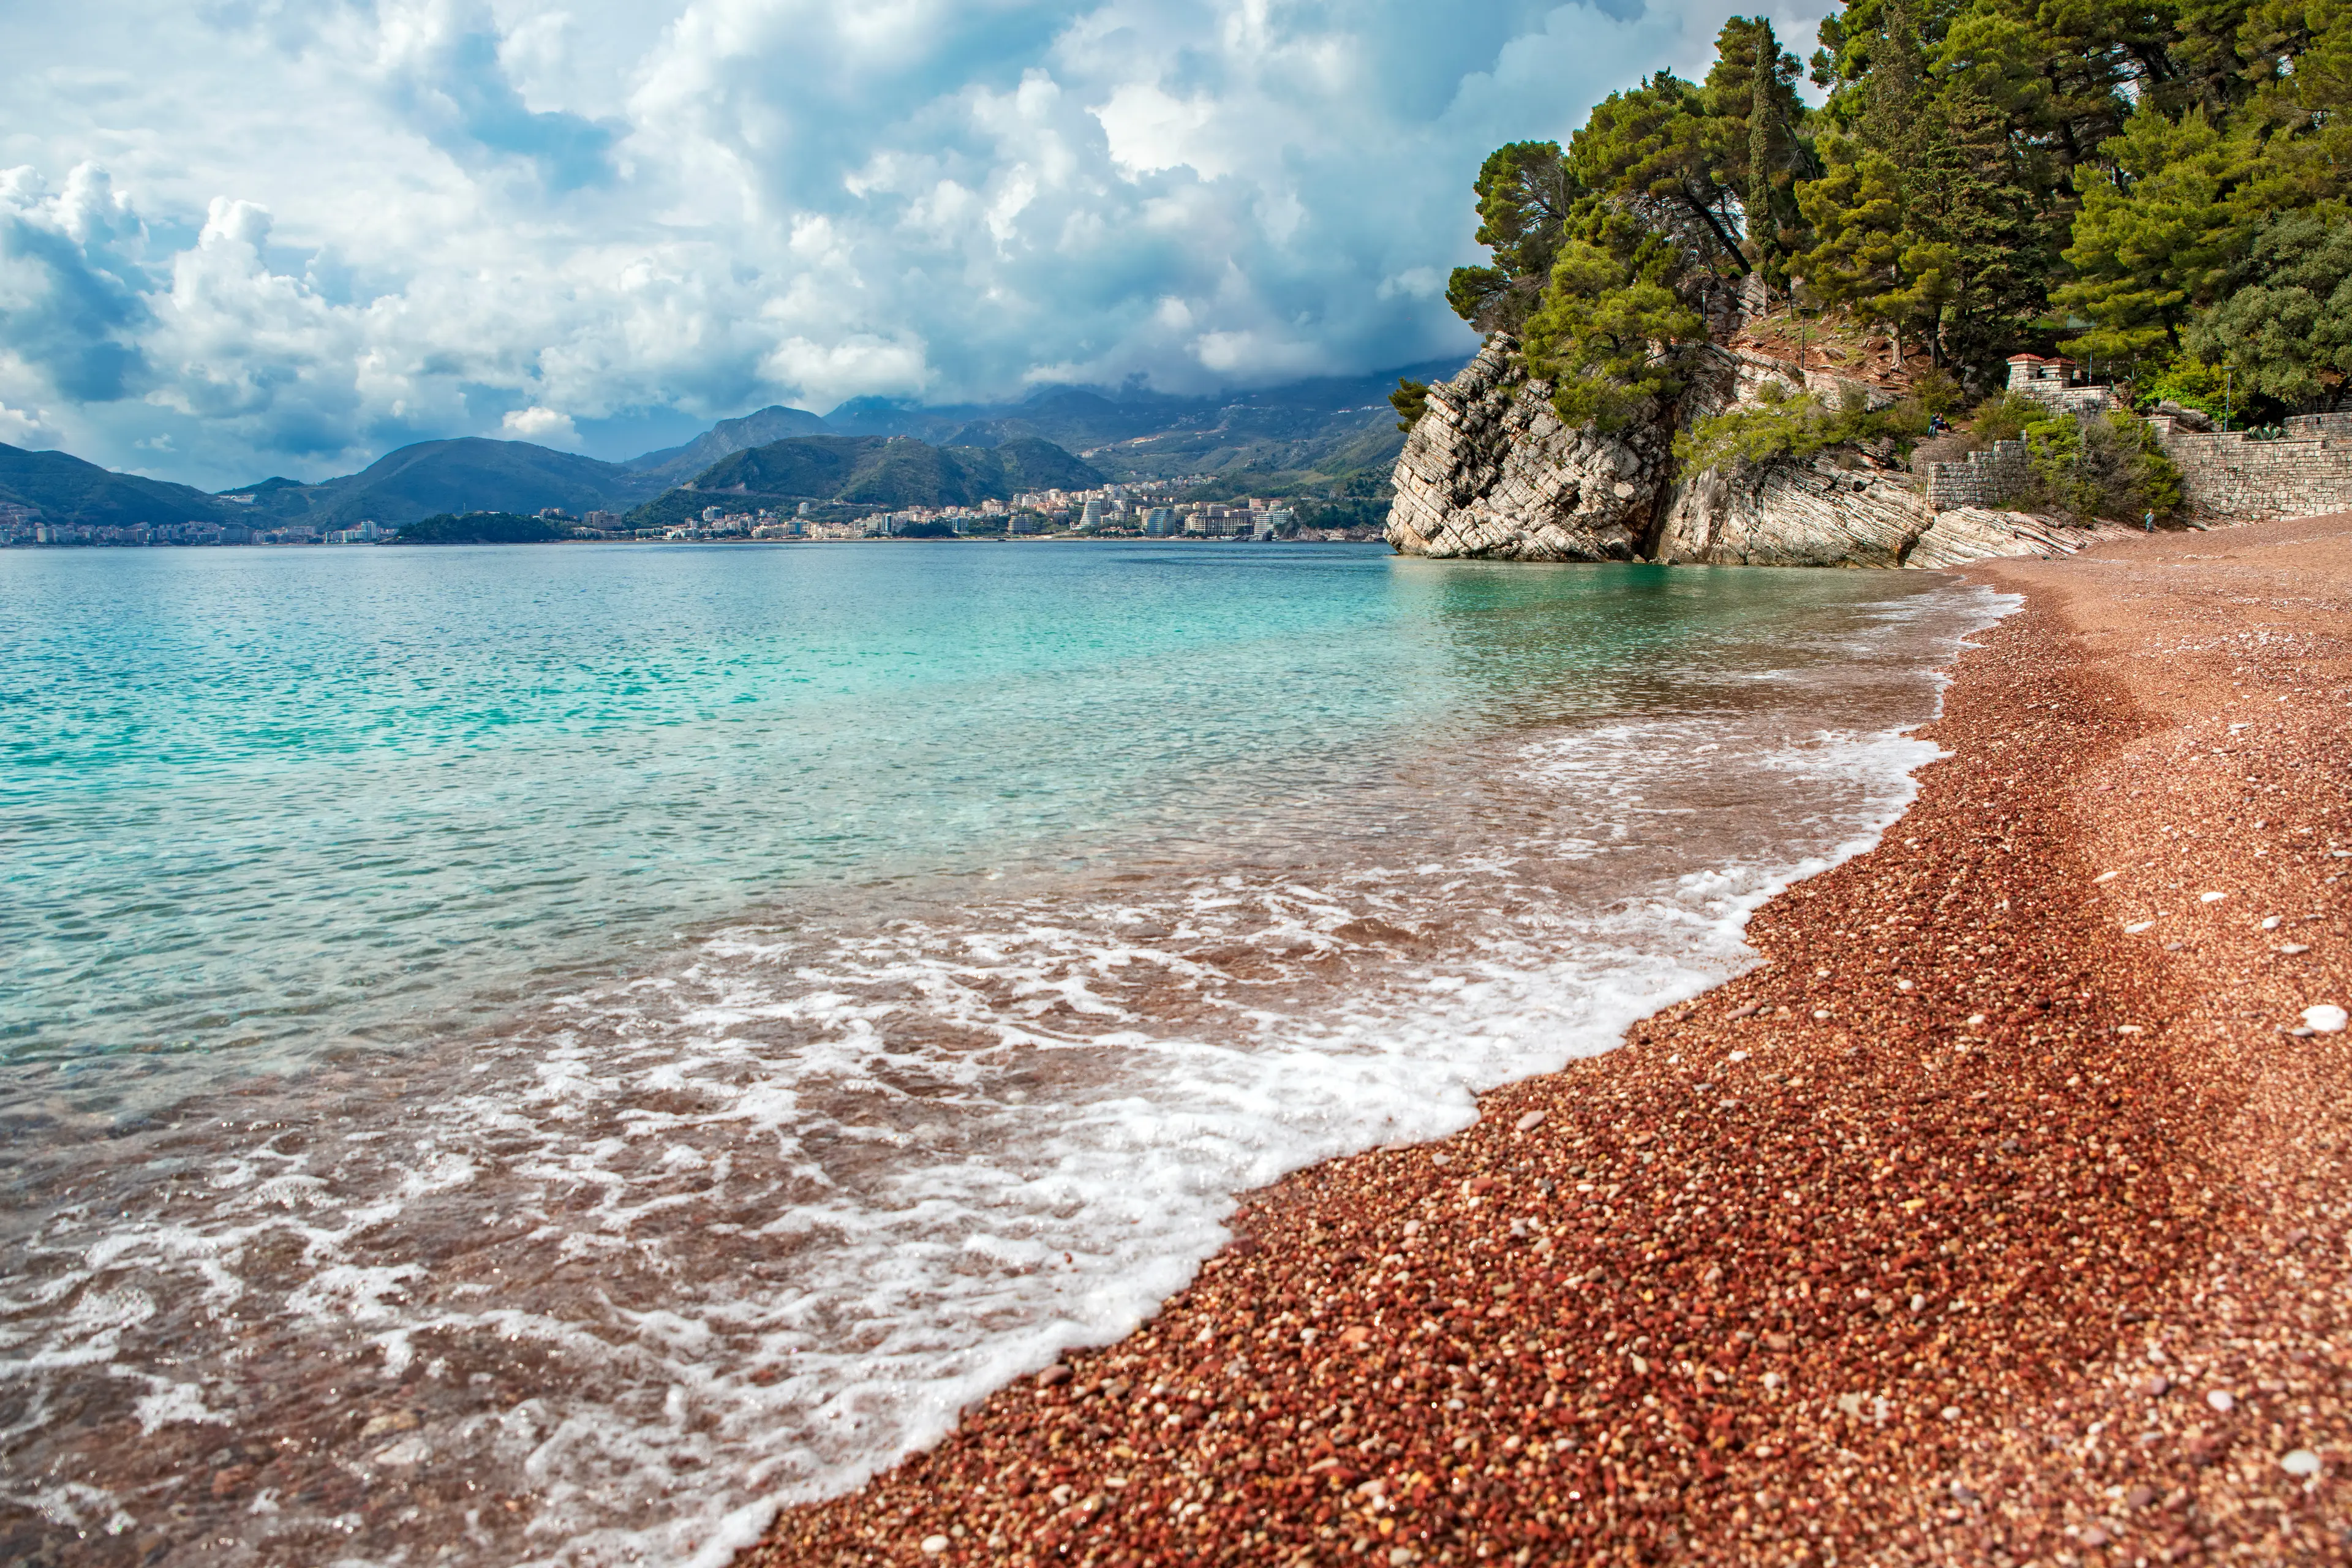 3-Day Family Relaxation and Sightseeing Tour in Budva, Montenegro